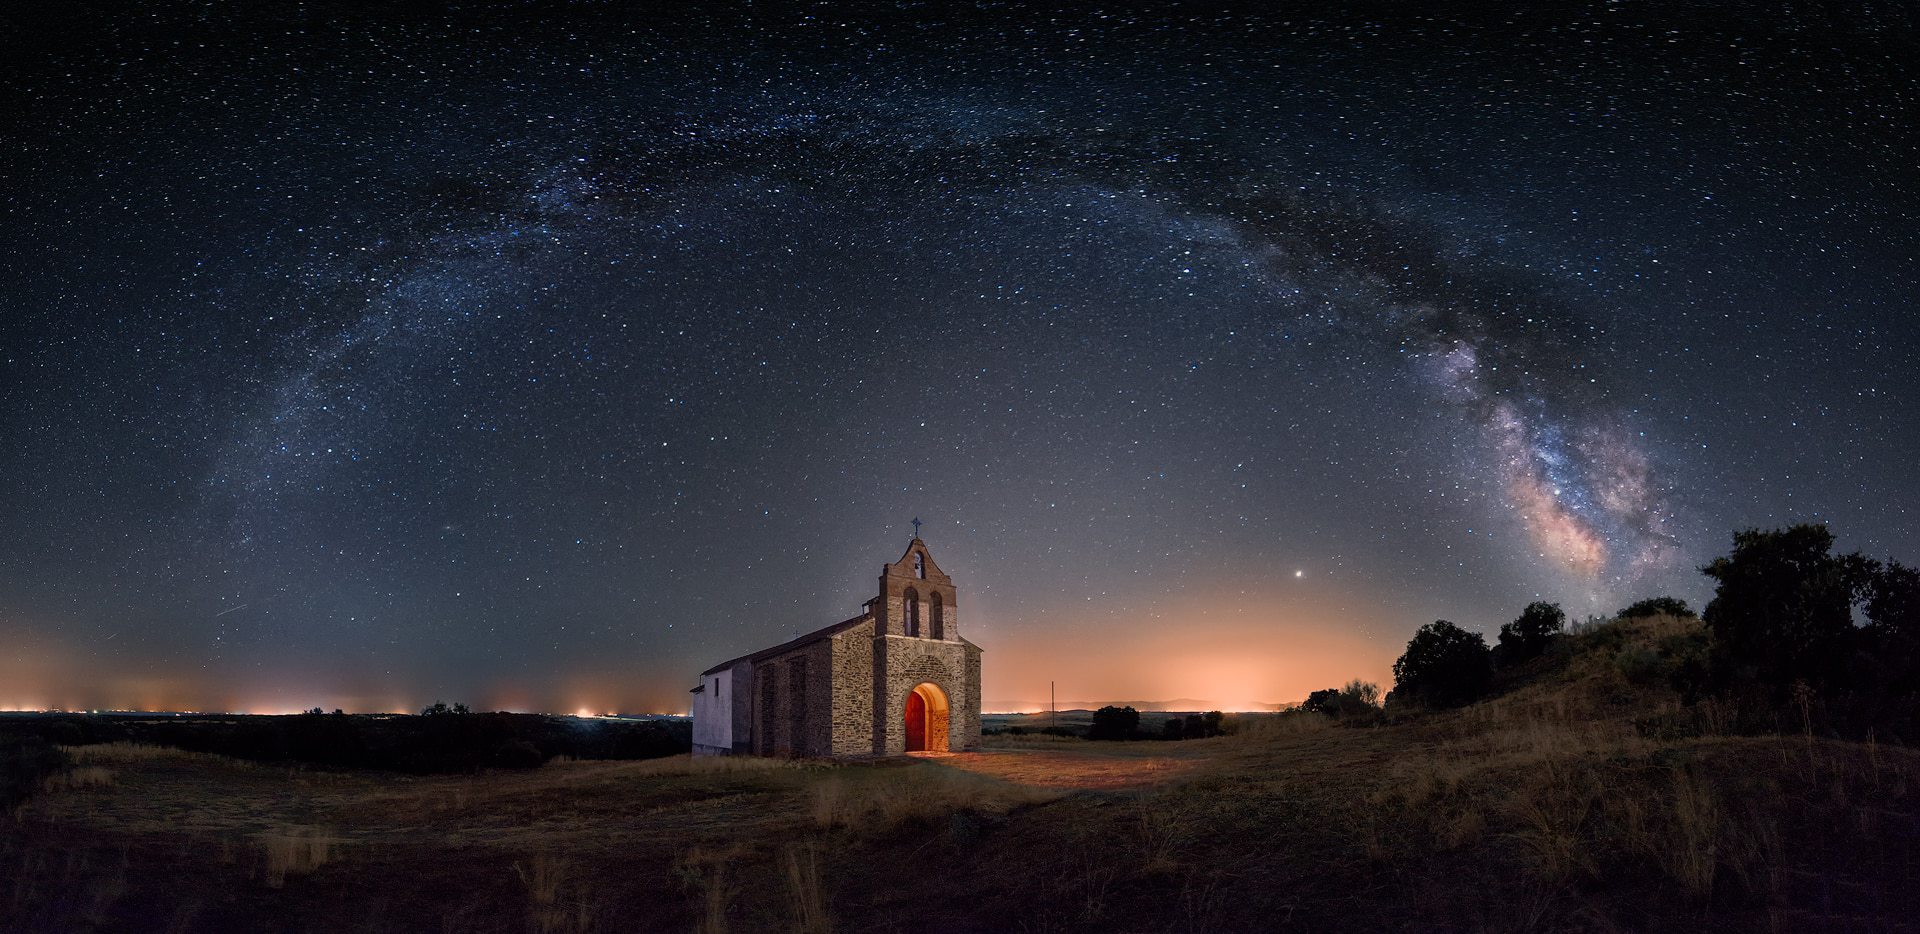 HOW TO ACHIEVE YOUR NEXT PANORAMIC OF THE MILKY WAY (STEP BY STEP)